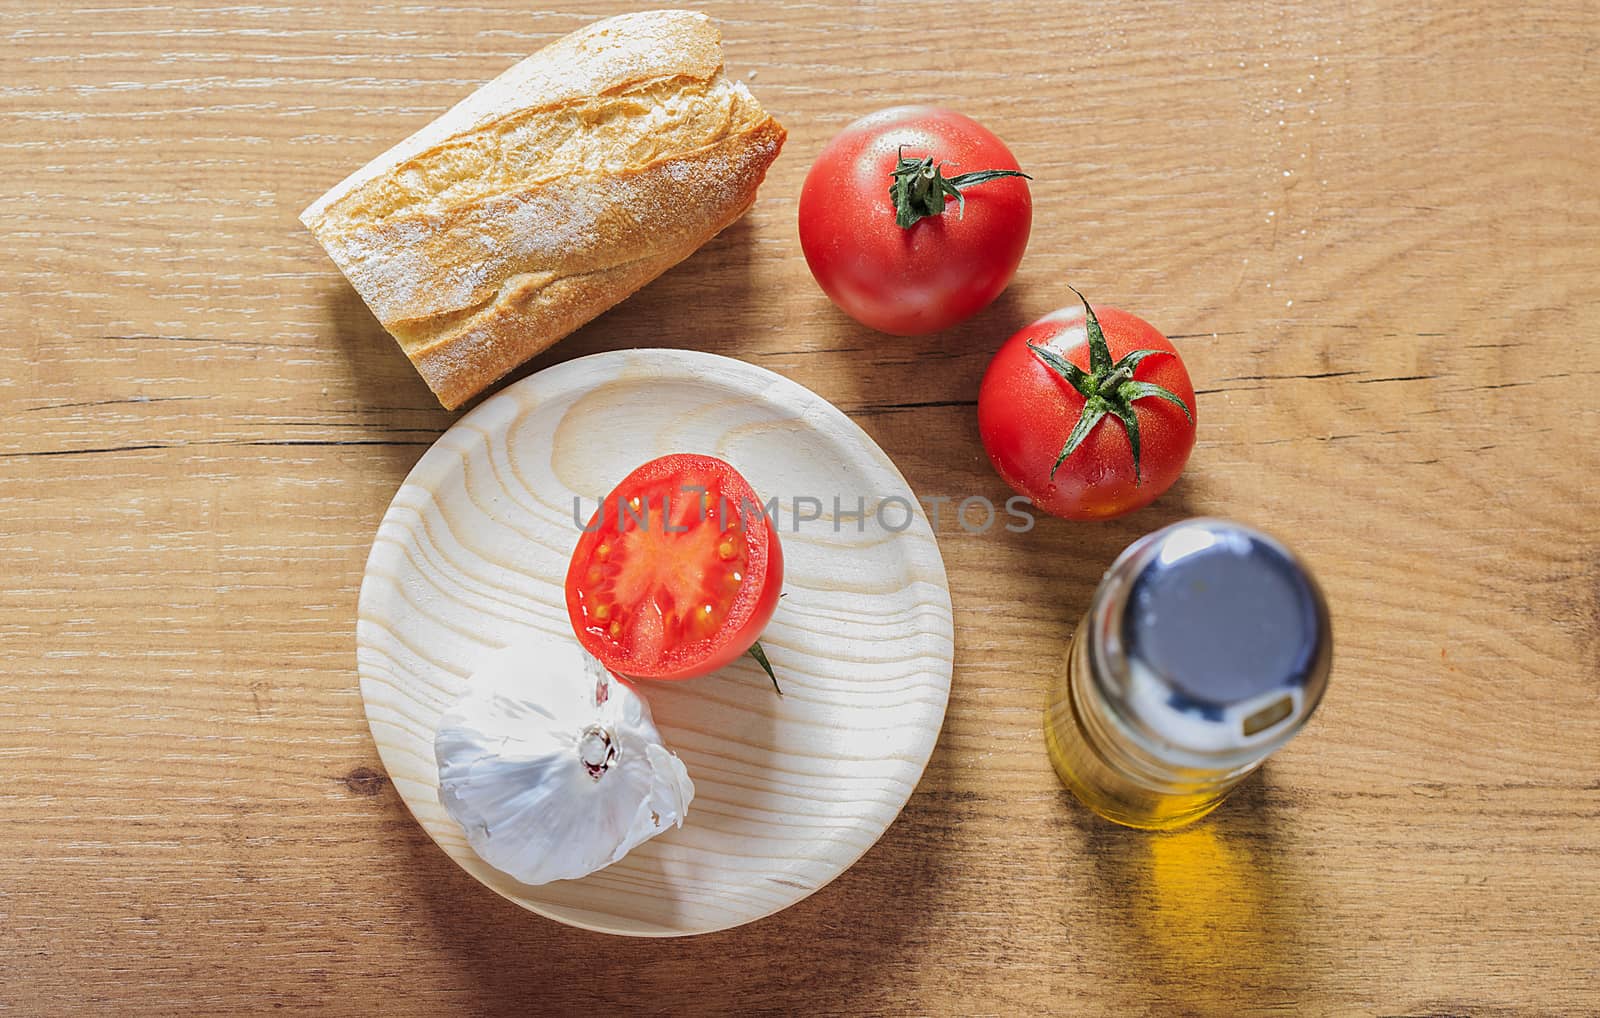 Bread and tomatoes